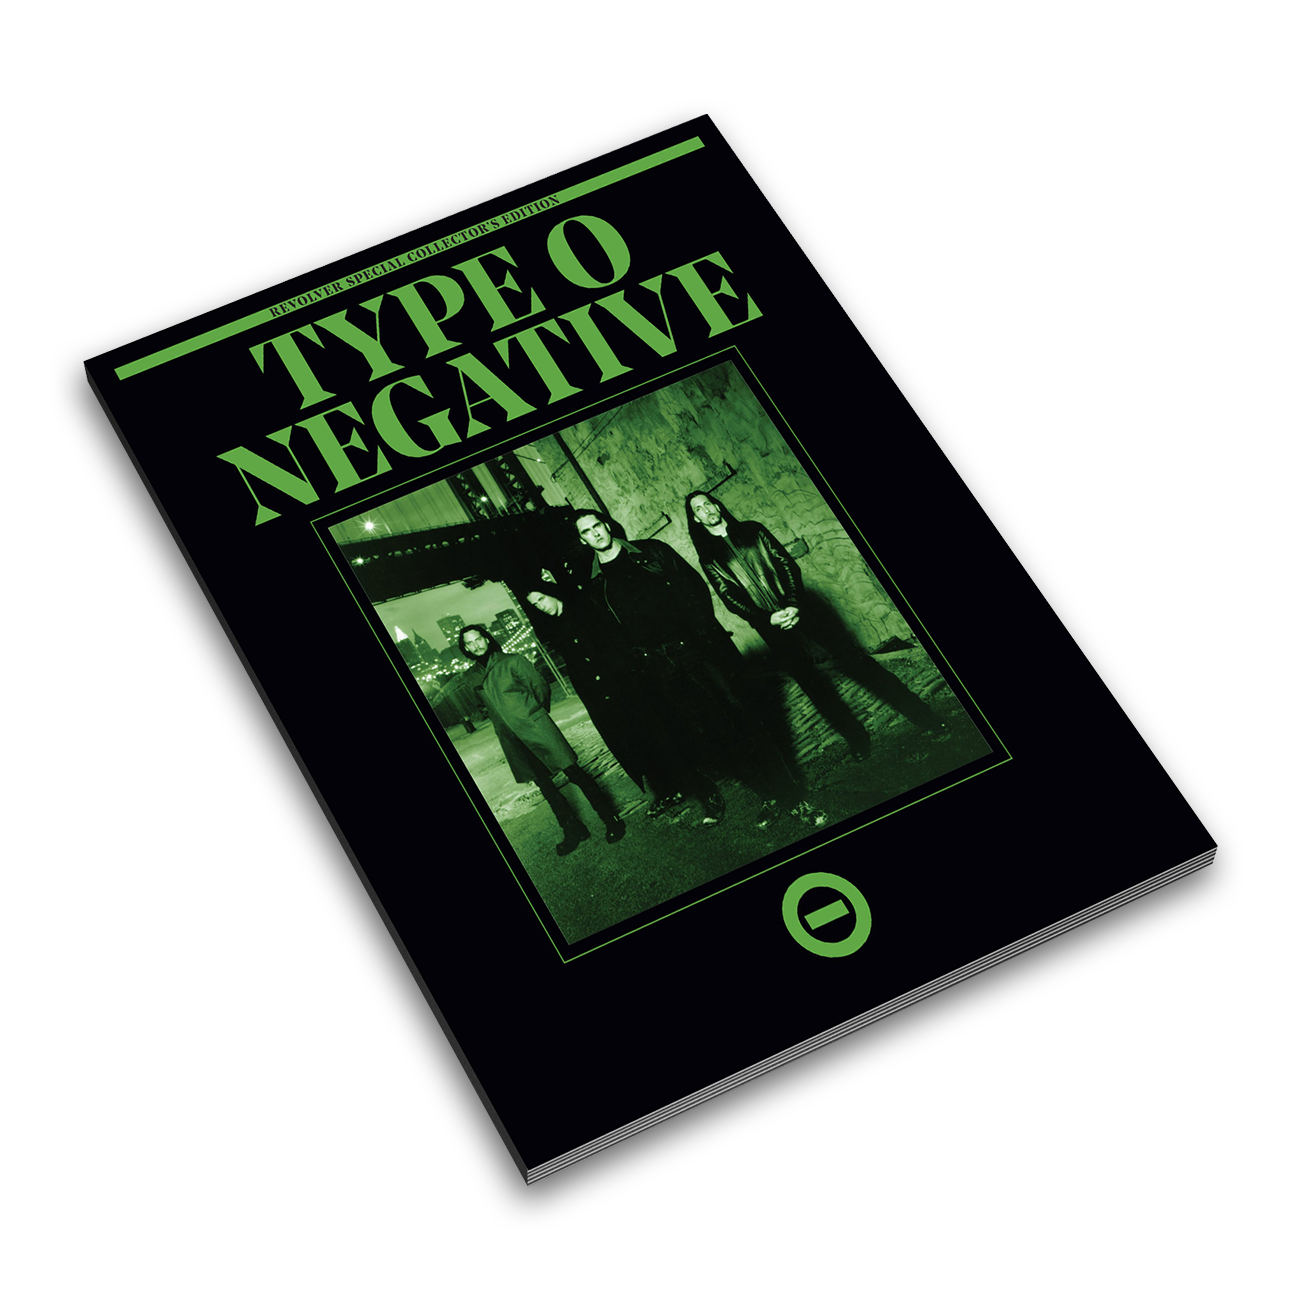 REVOLVER x TYPE O NEGATIVE: BOOK OF TYPE O NEGATIVE SPECIAL COLLECTOR'S EDITION